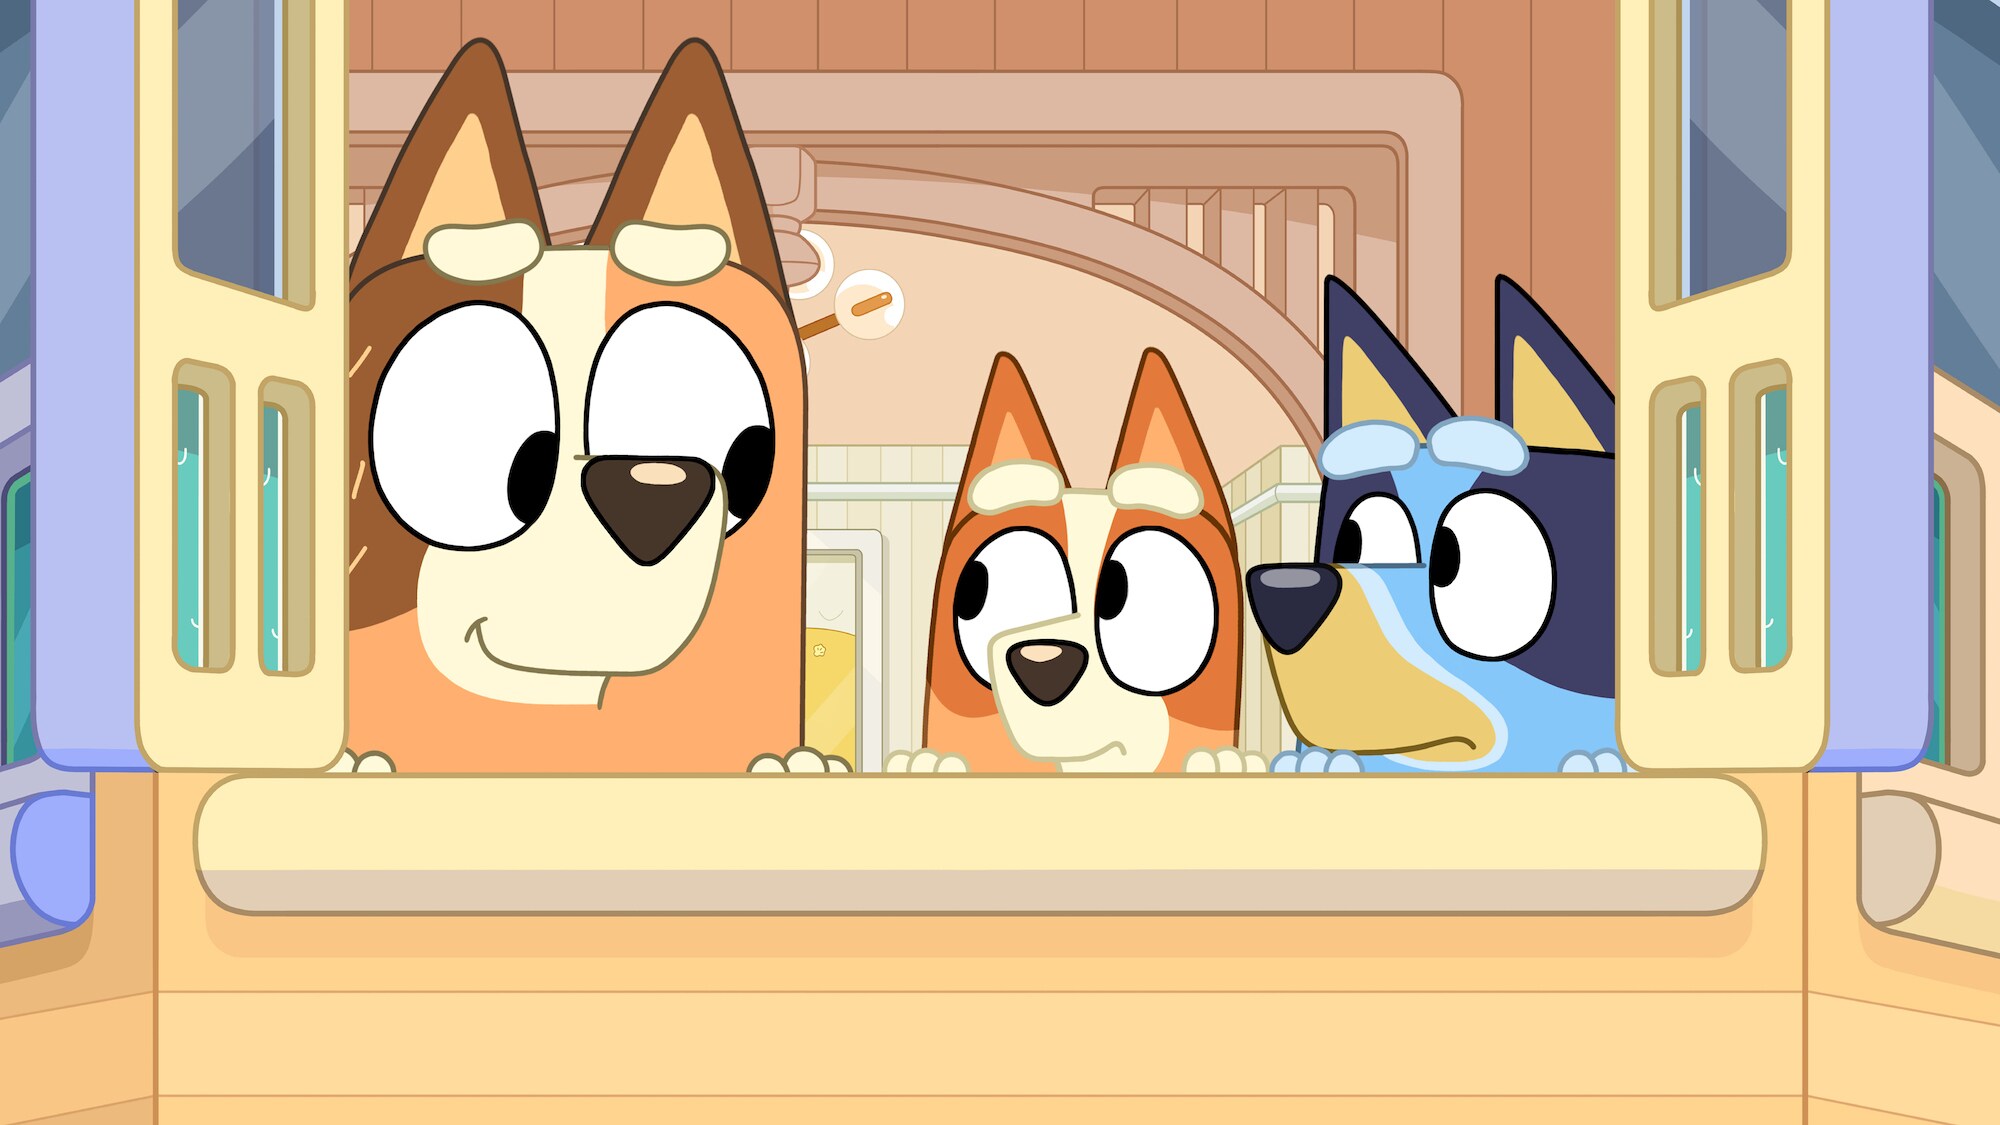 Bluey and Bingo are surprised to see Mum join their secret spy ring! (Credit: Ludo Studio)